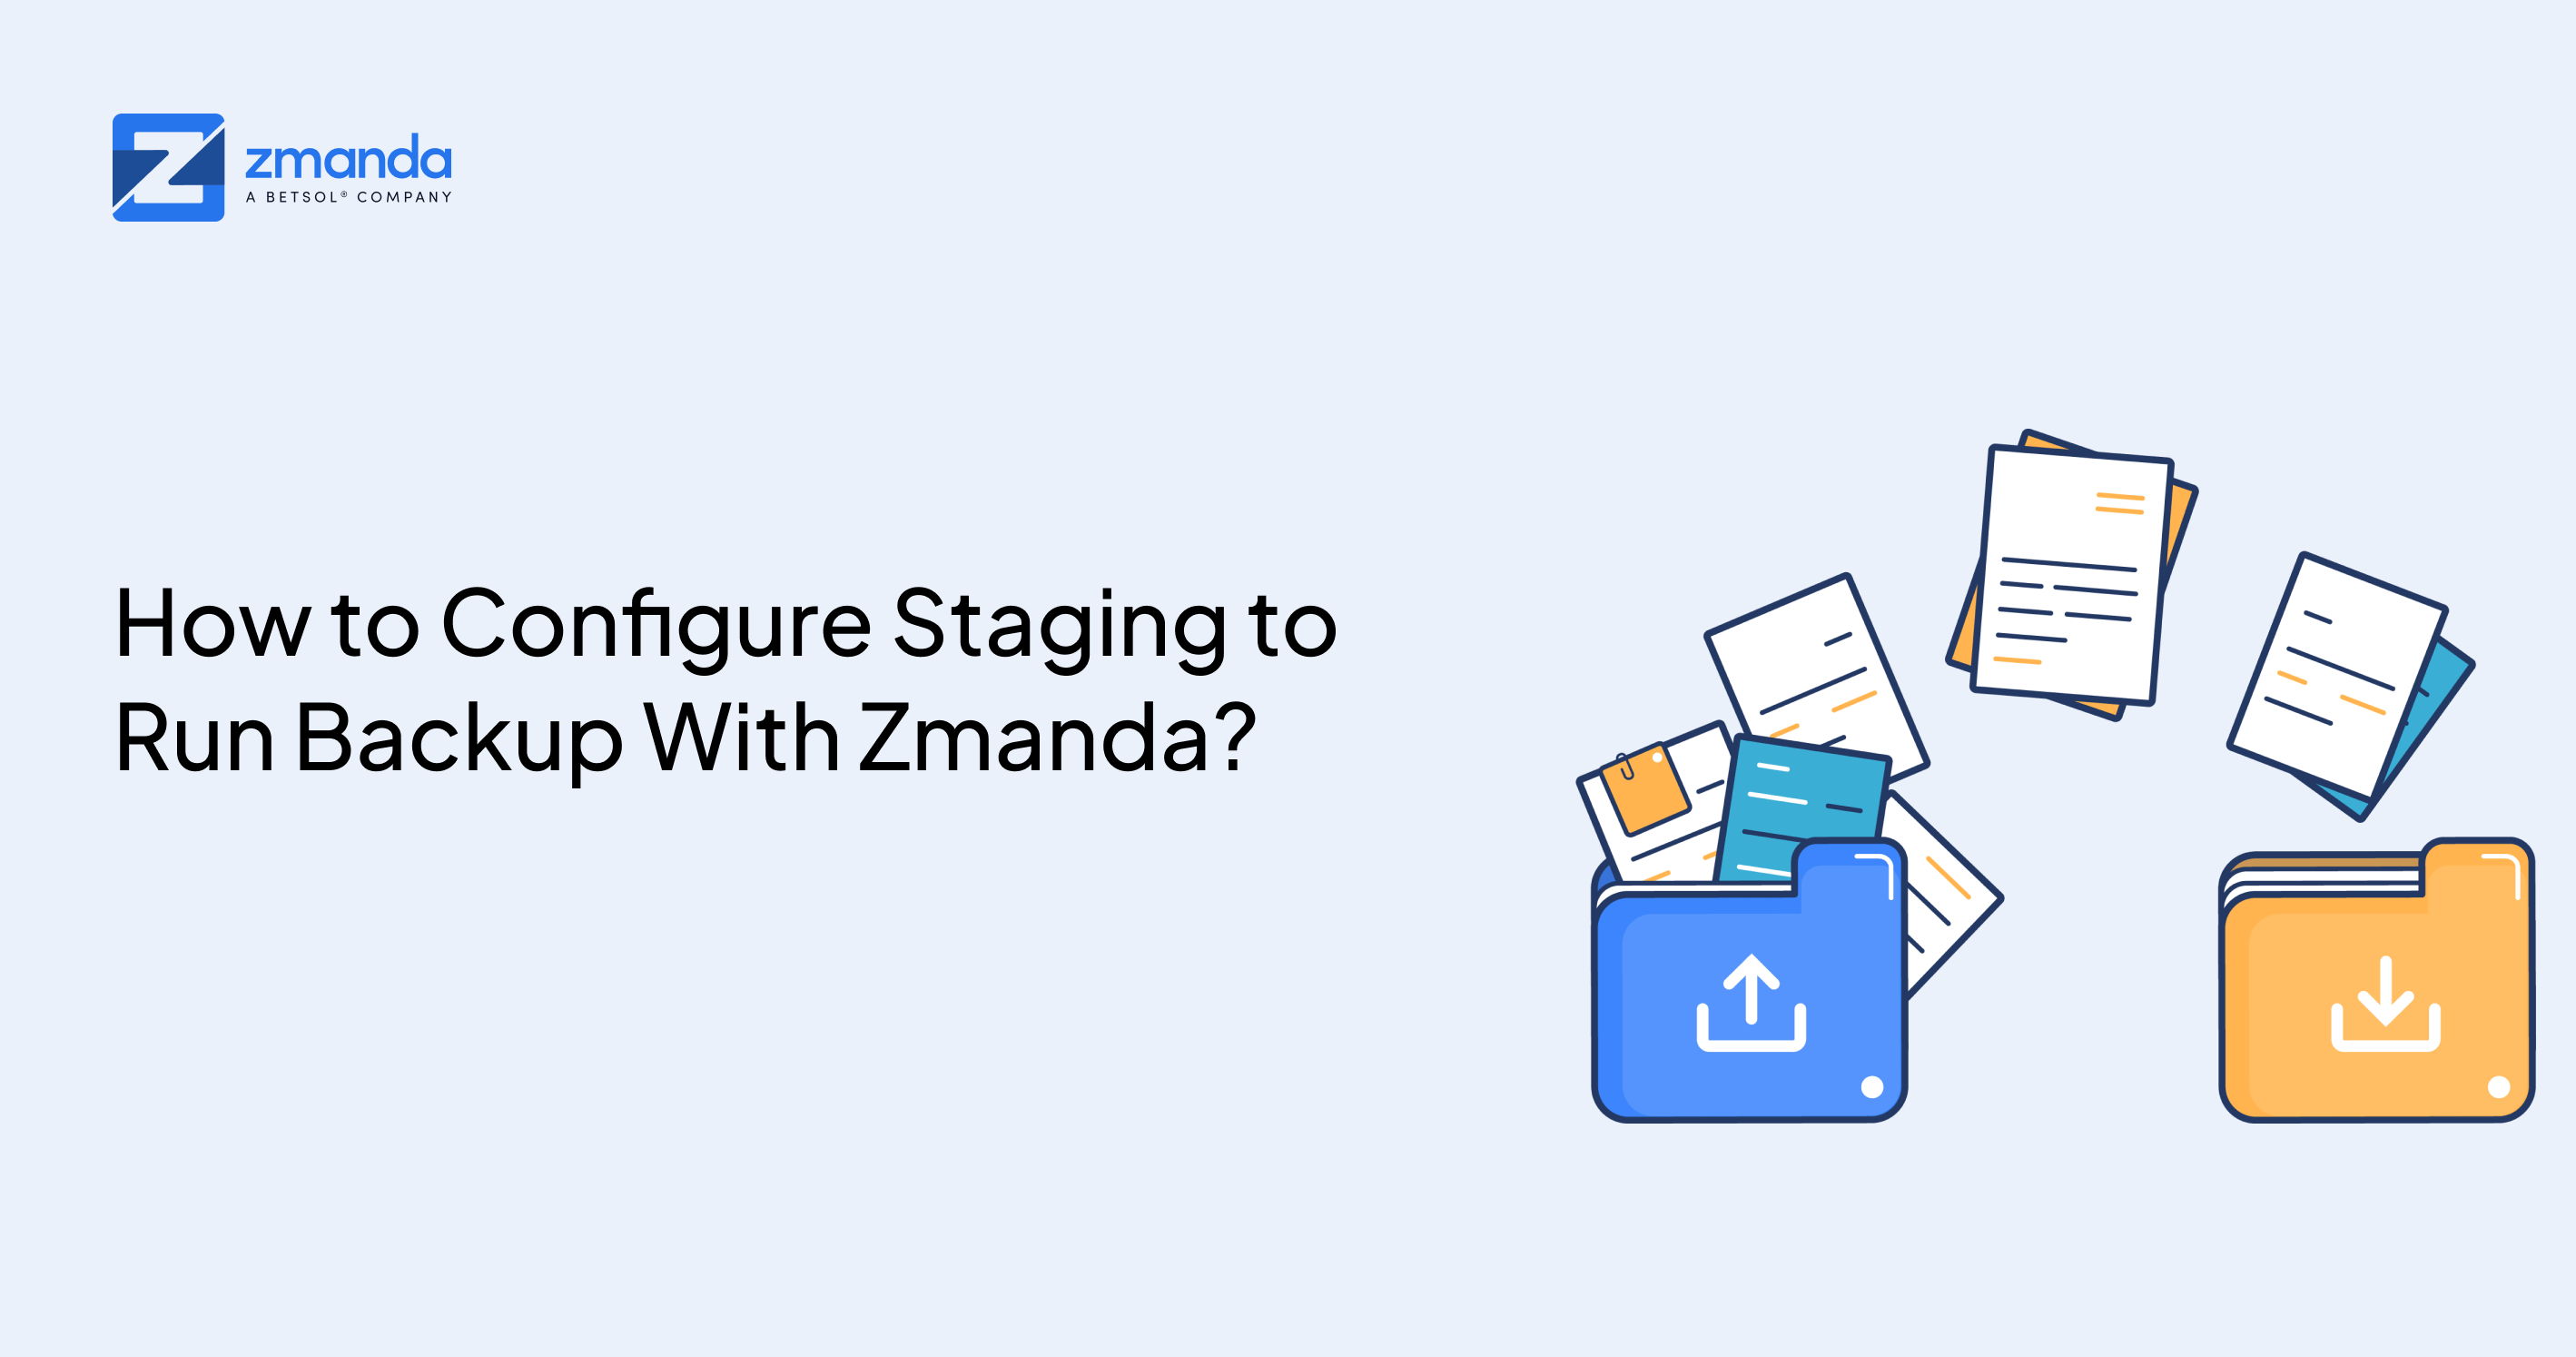 How to Configure Staging to Run Backup With Zmanda